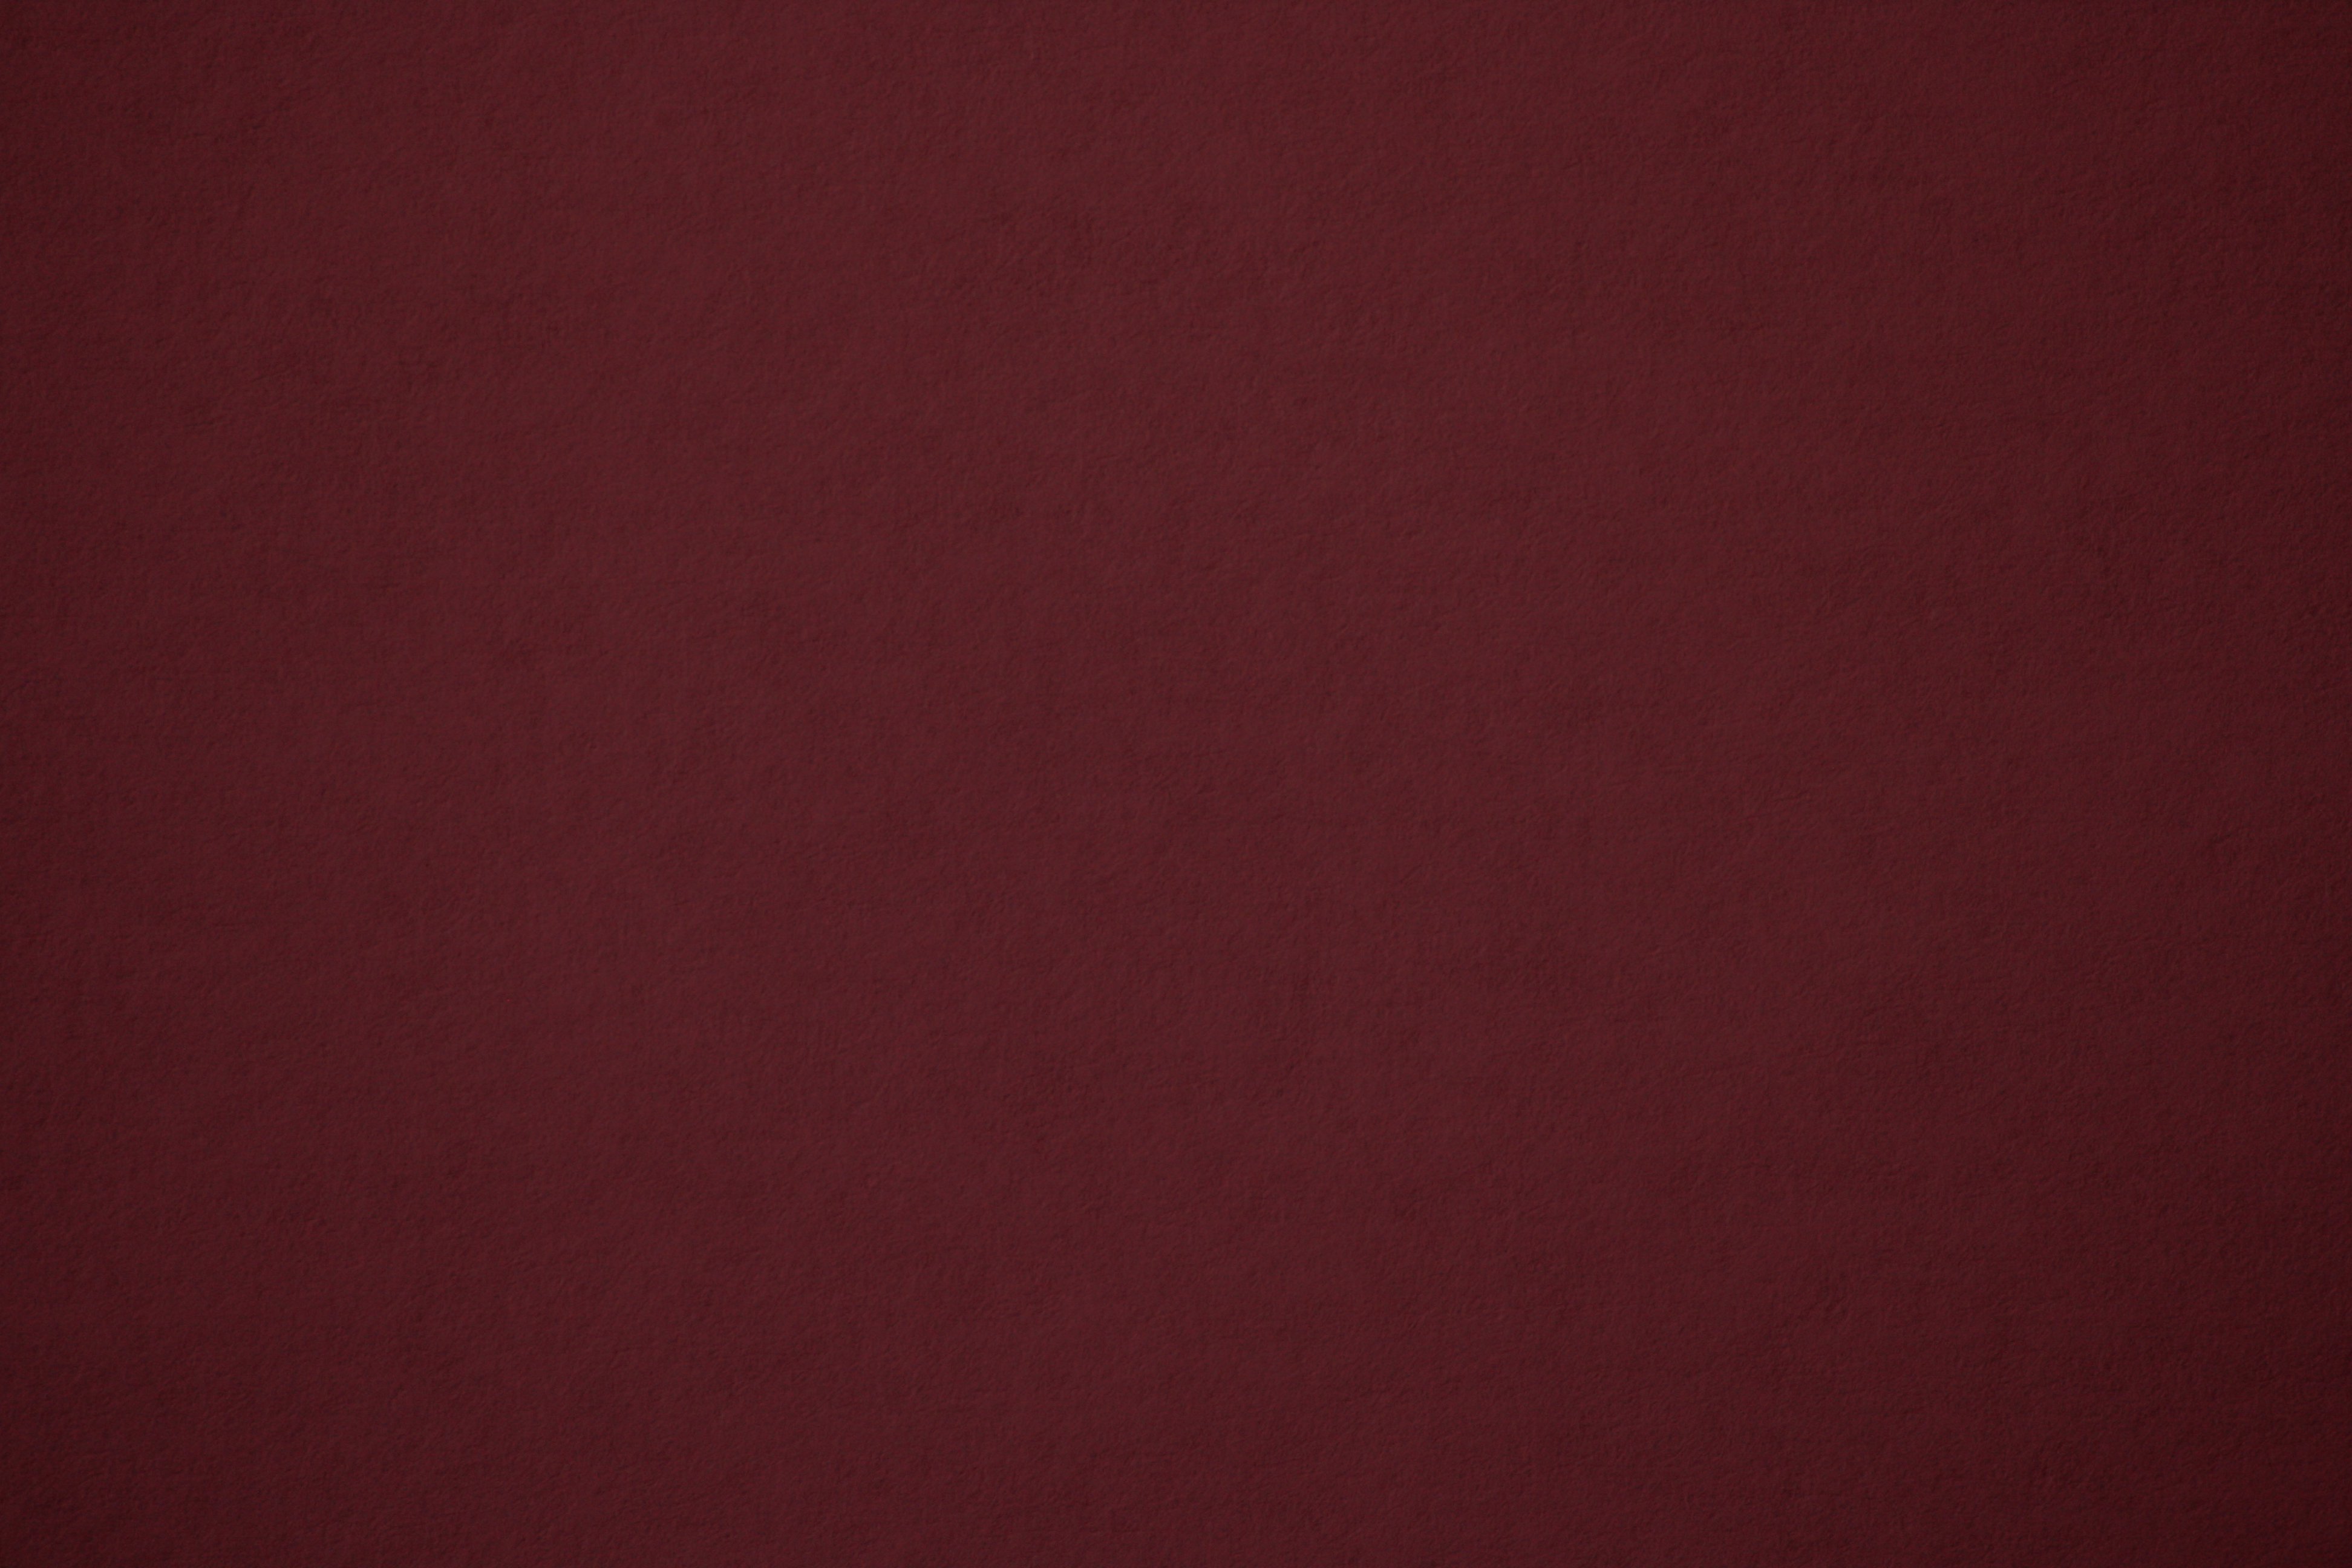 Gallery For Gt Maroon Background Texture